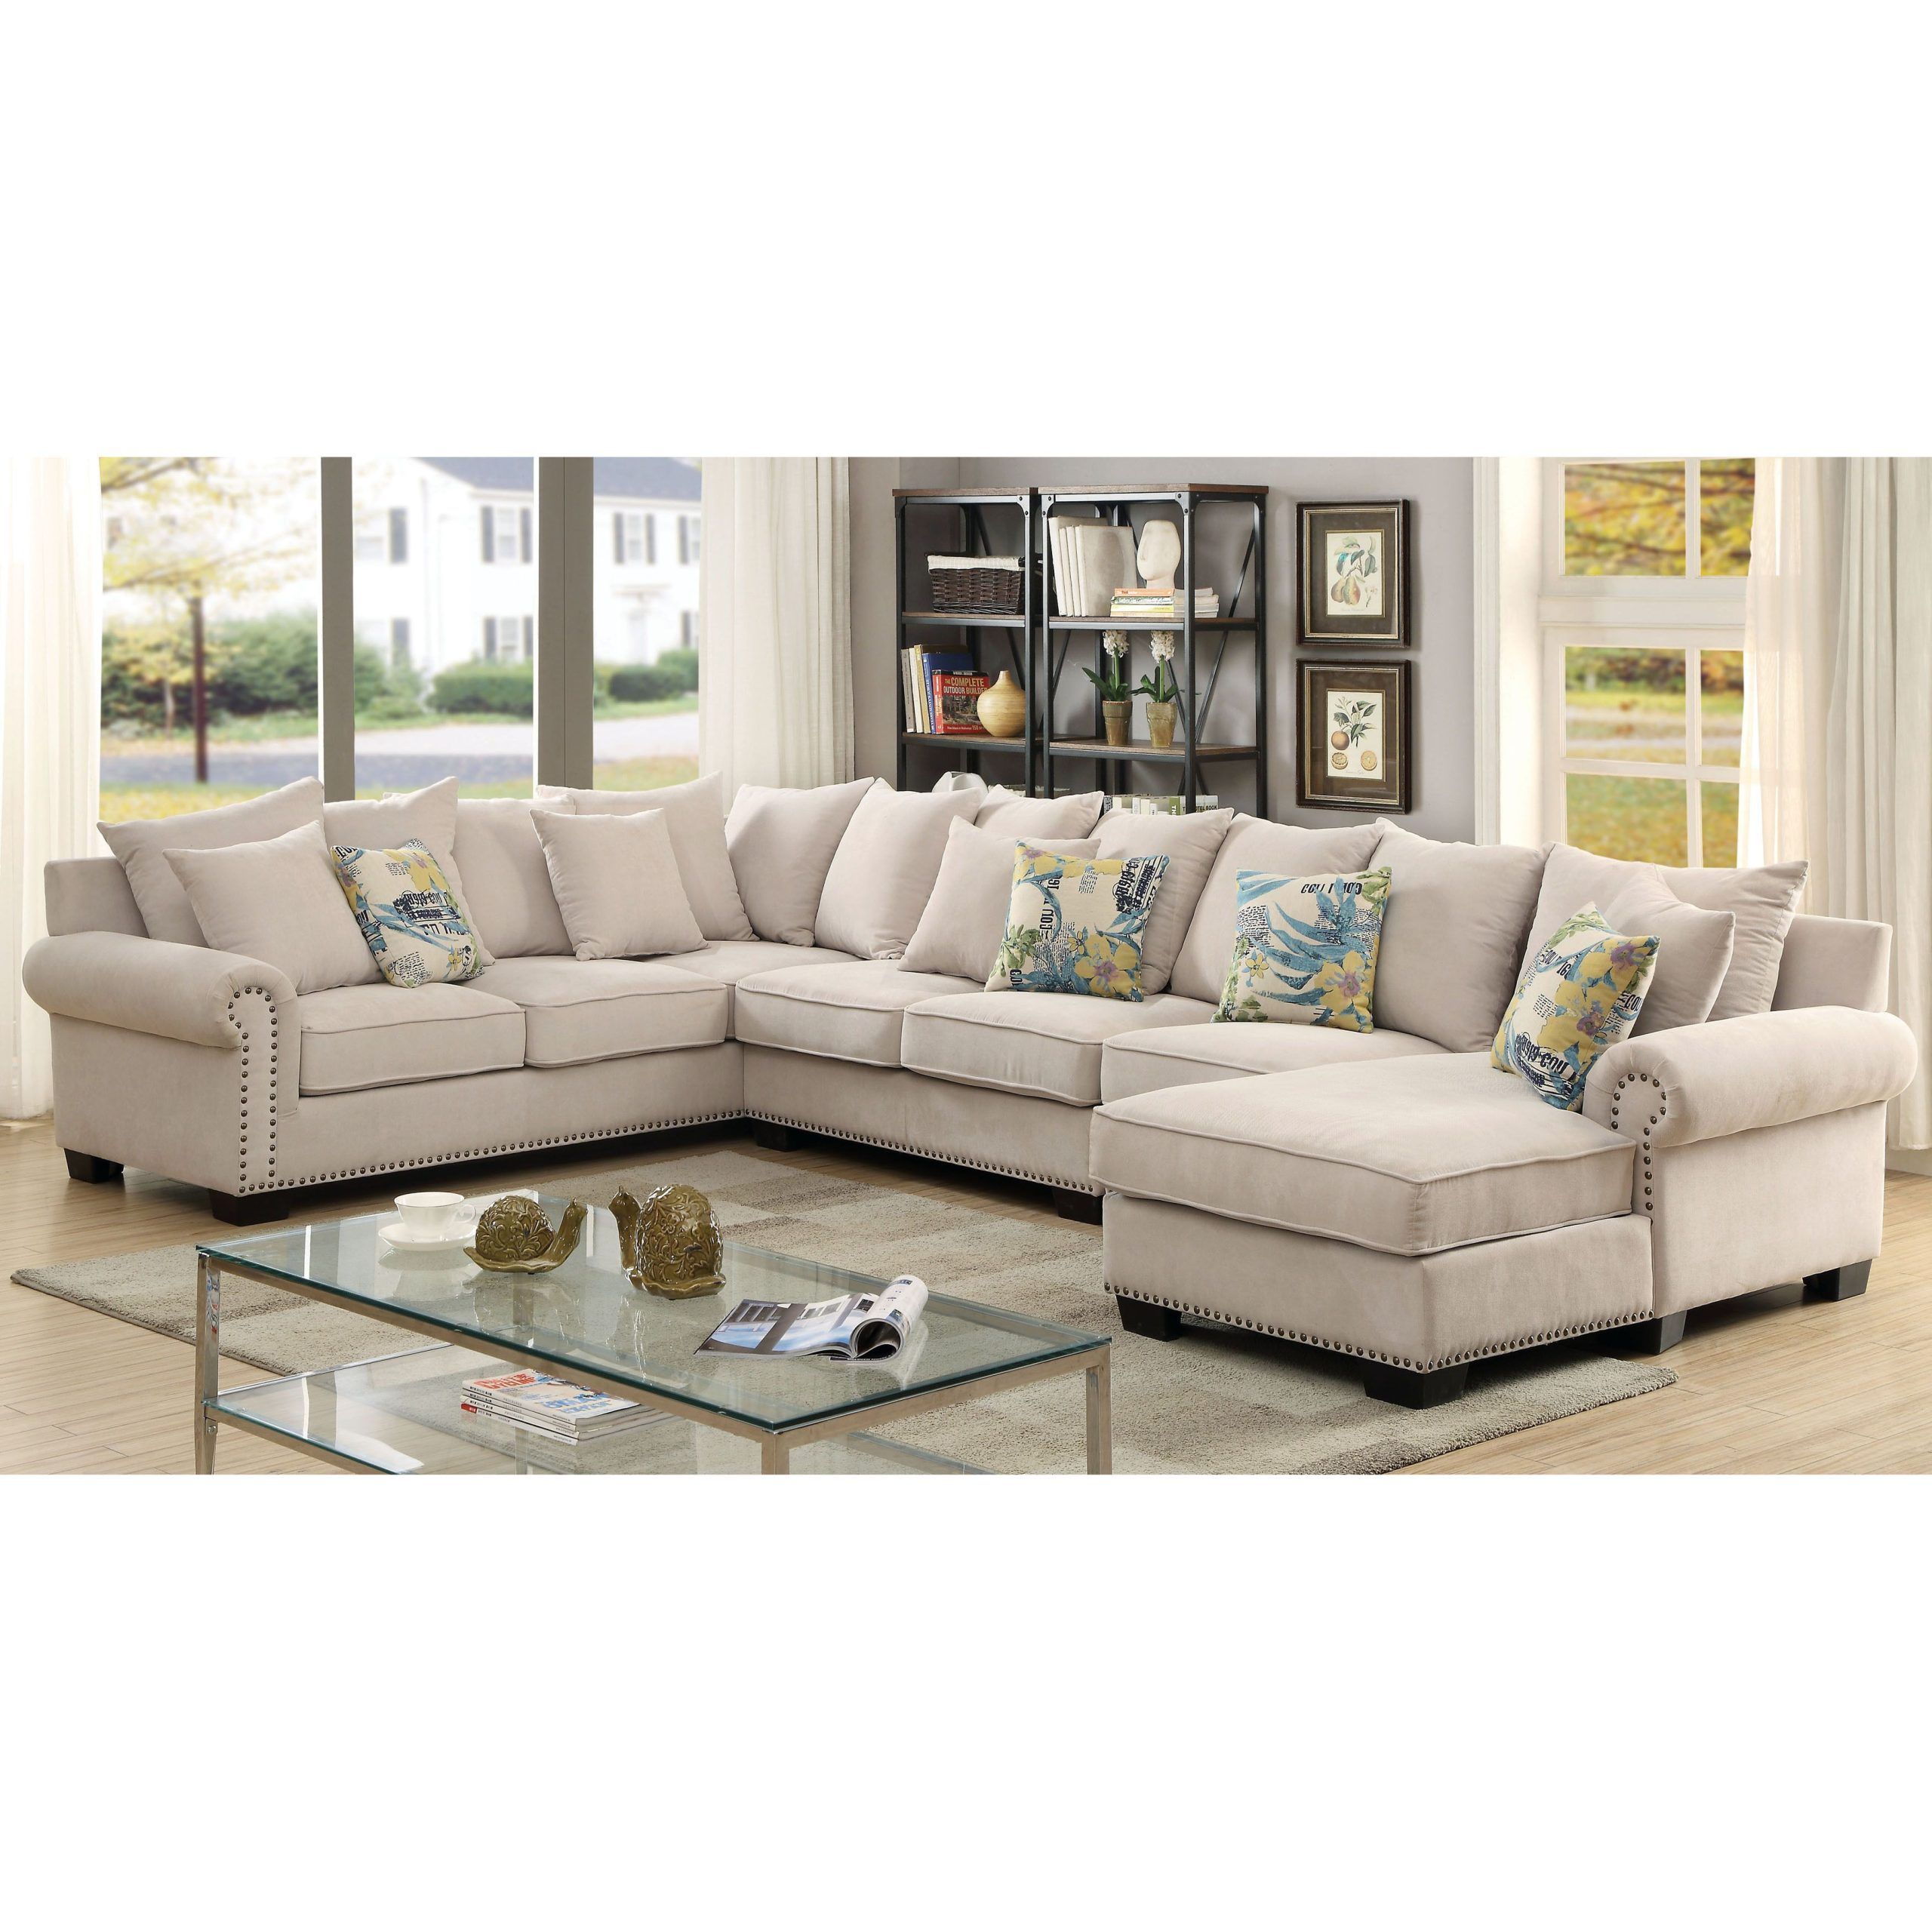 Furniture Of America Riti Contemporary Beige Sectional – On Sale Intended For U Shaped Couches In Beige (View 14 of 20)